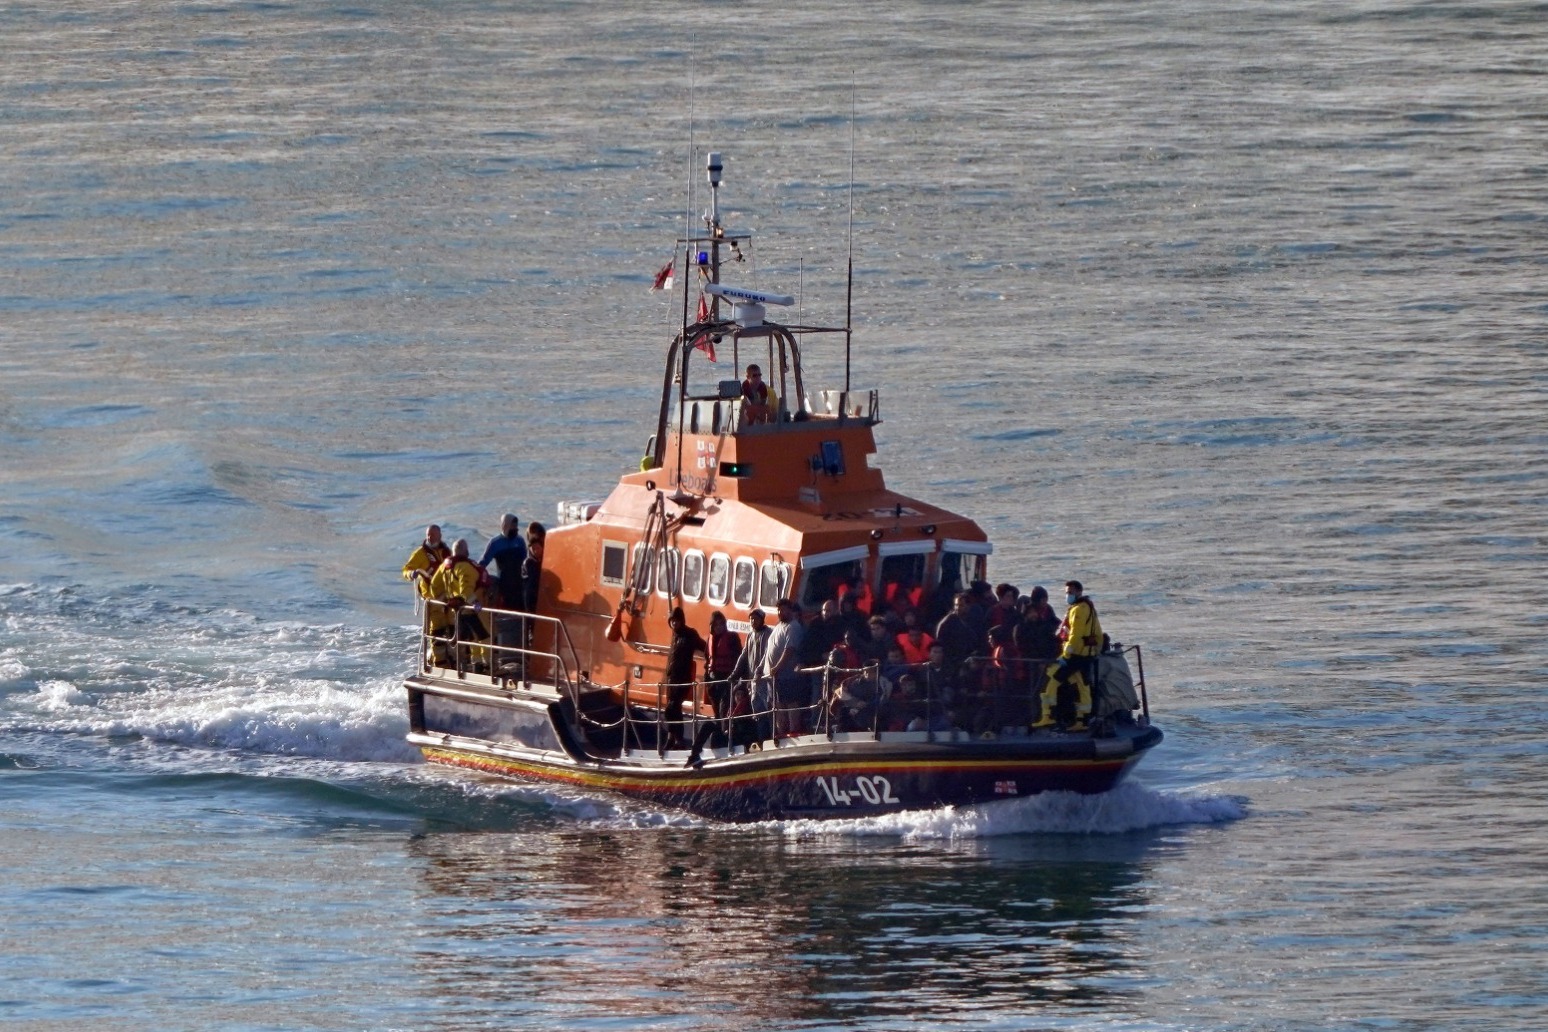 Six dead and 50 rescued after boat carrying migrants sinks in Channel 